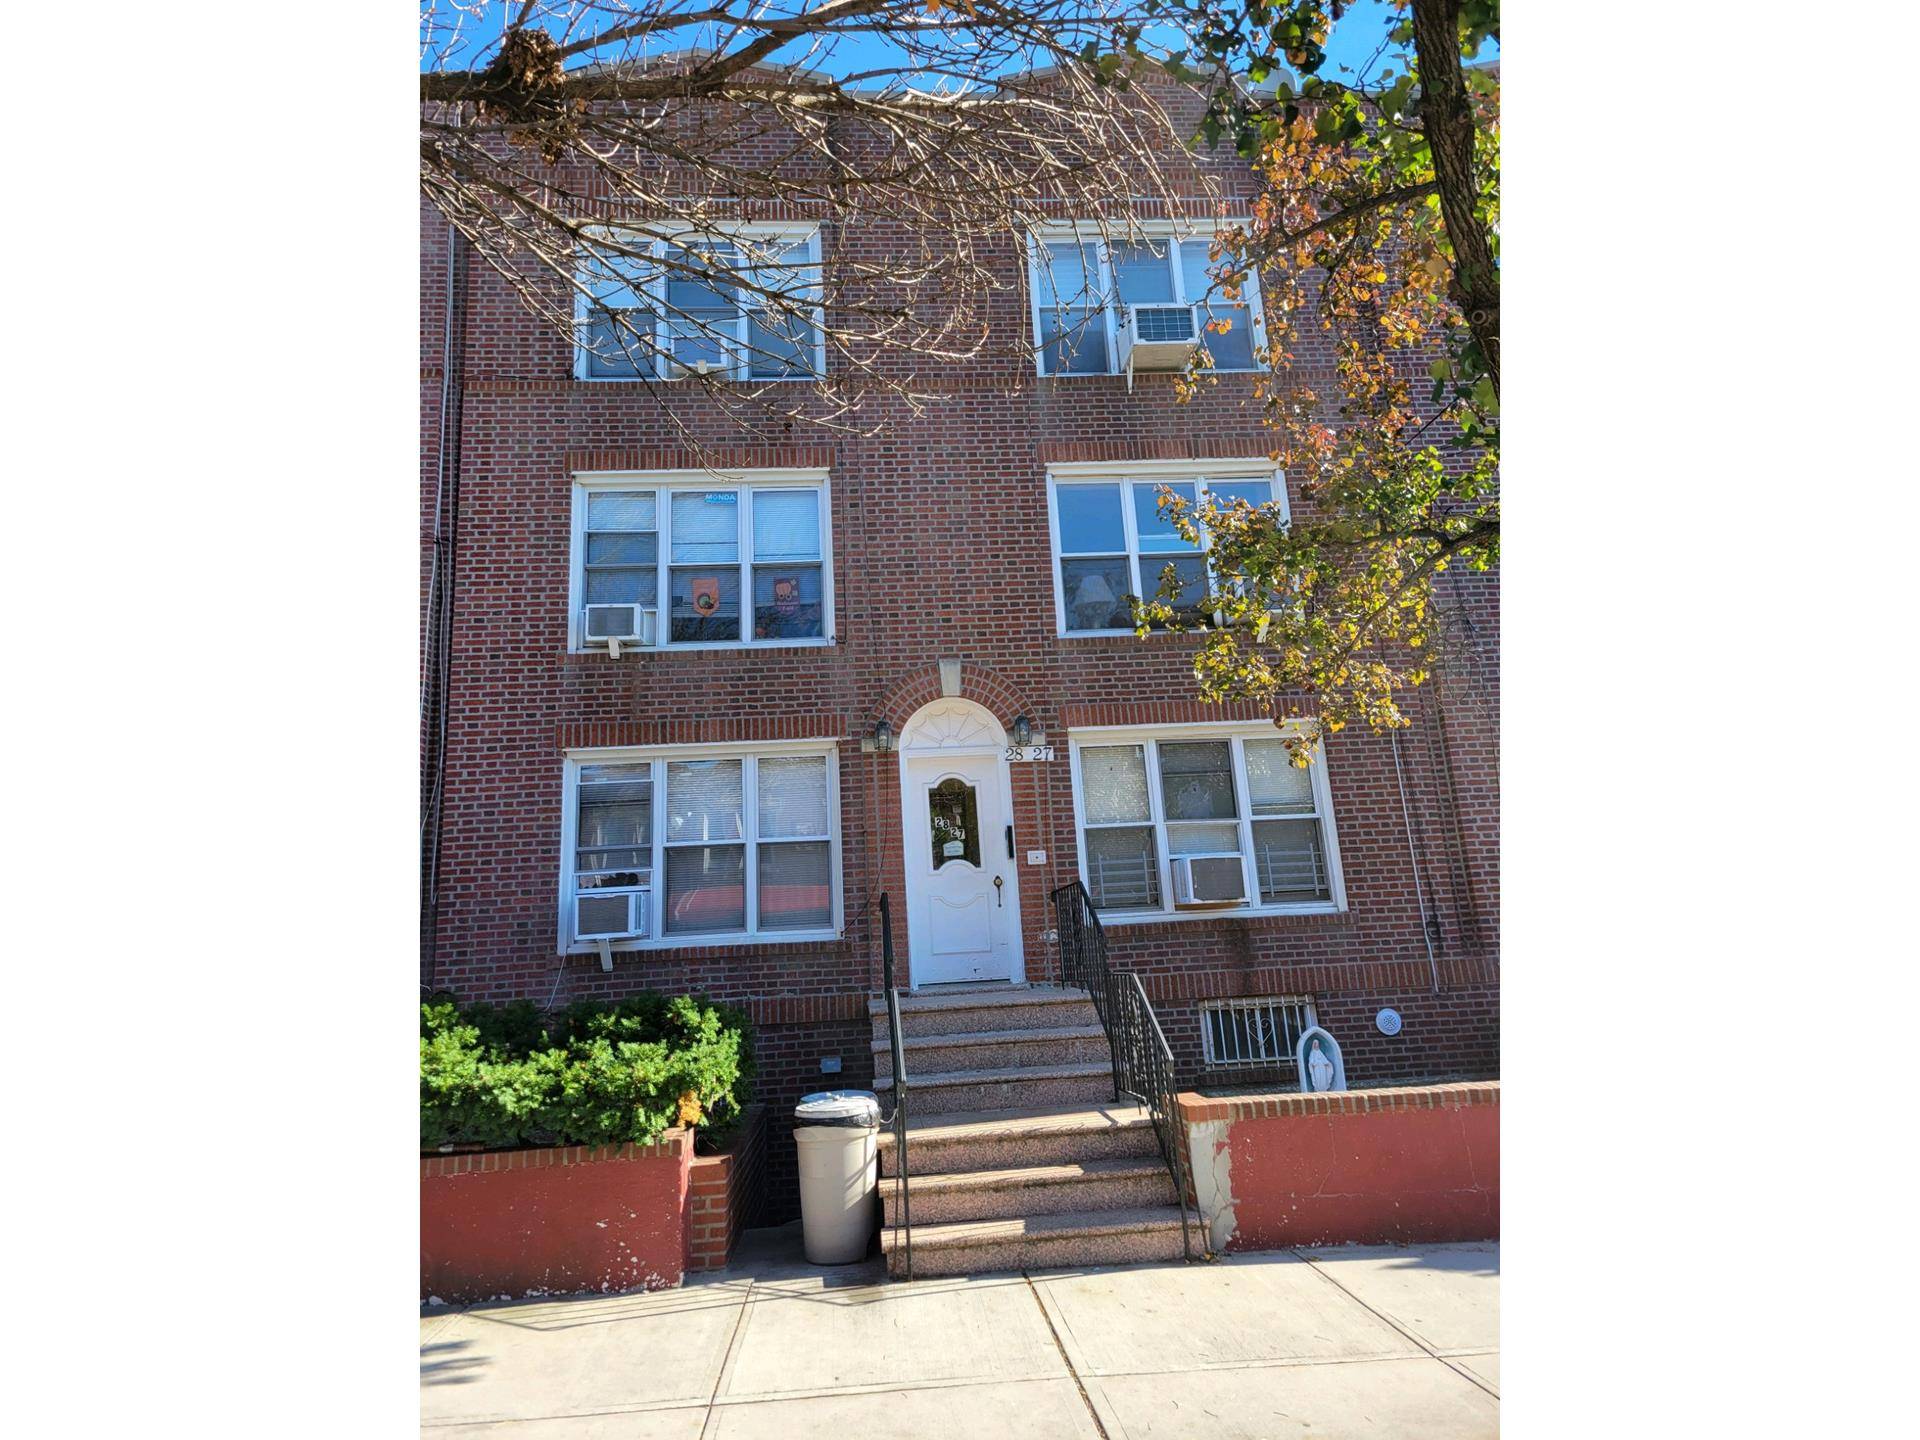 For Sale Immaculate Multi Family Brick Building in Prime Desirable Astoria LocationNestled in the heart of Astoria, Queens, NY, this exceptional multi family brick building presents a lucrative investment opportunity.